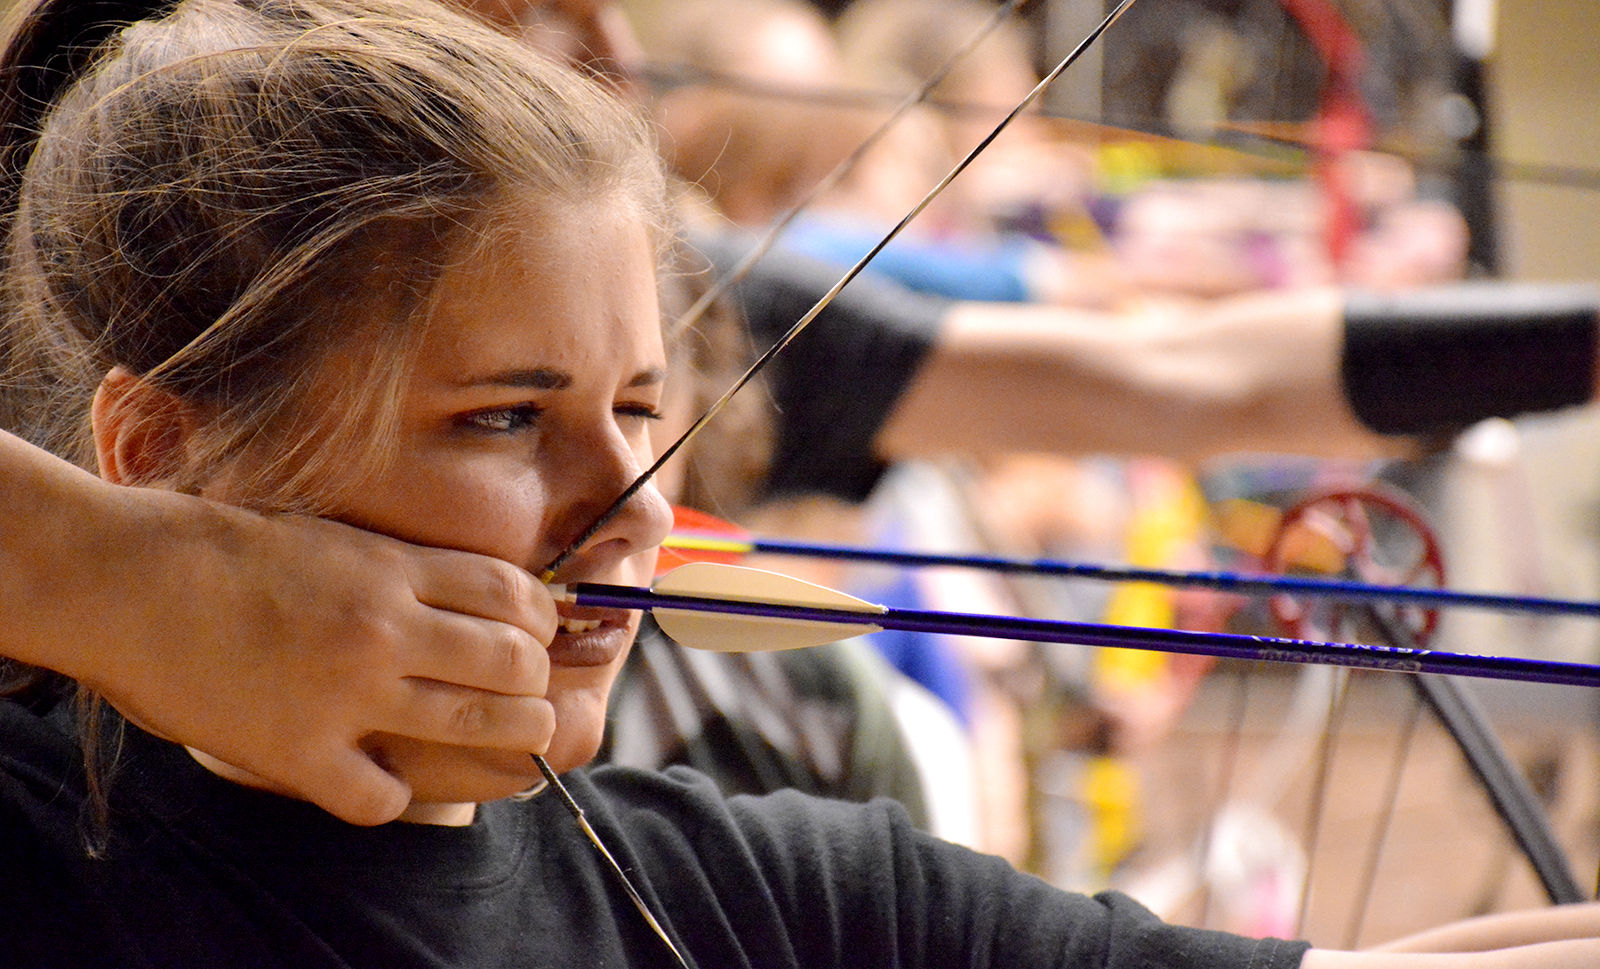 I was never very worried about it Despite public outcry, school archery programs found to be unaffected by new DOE regulations News cullmantimes